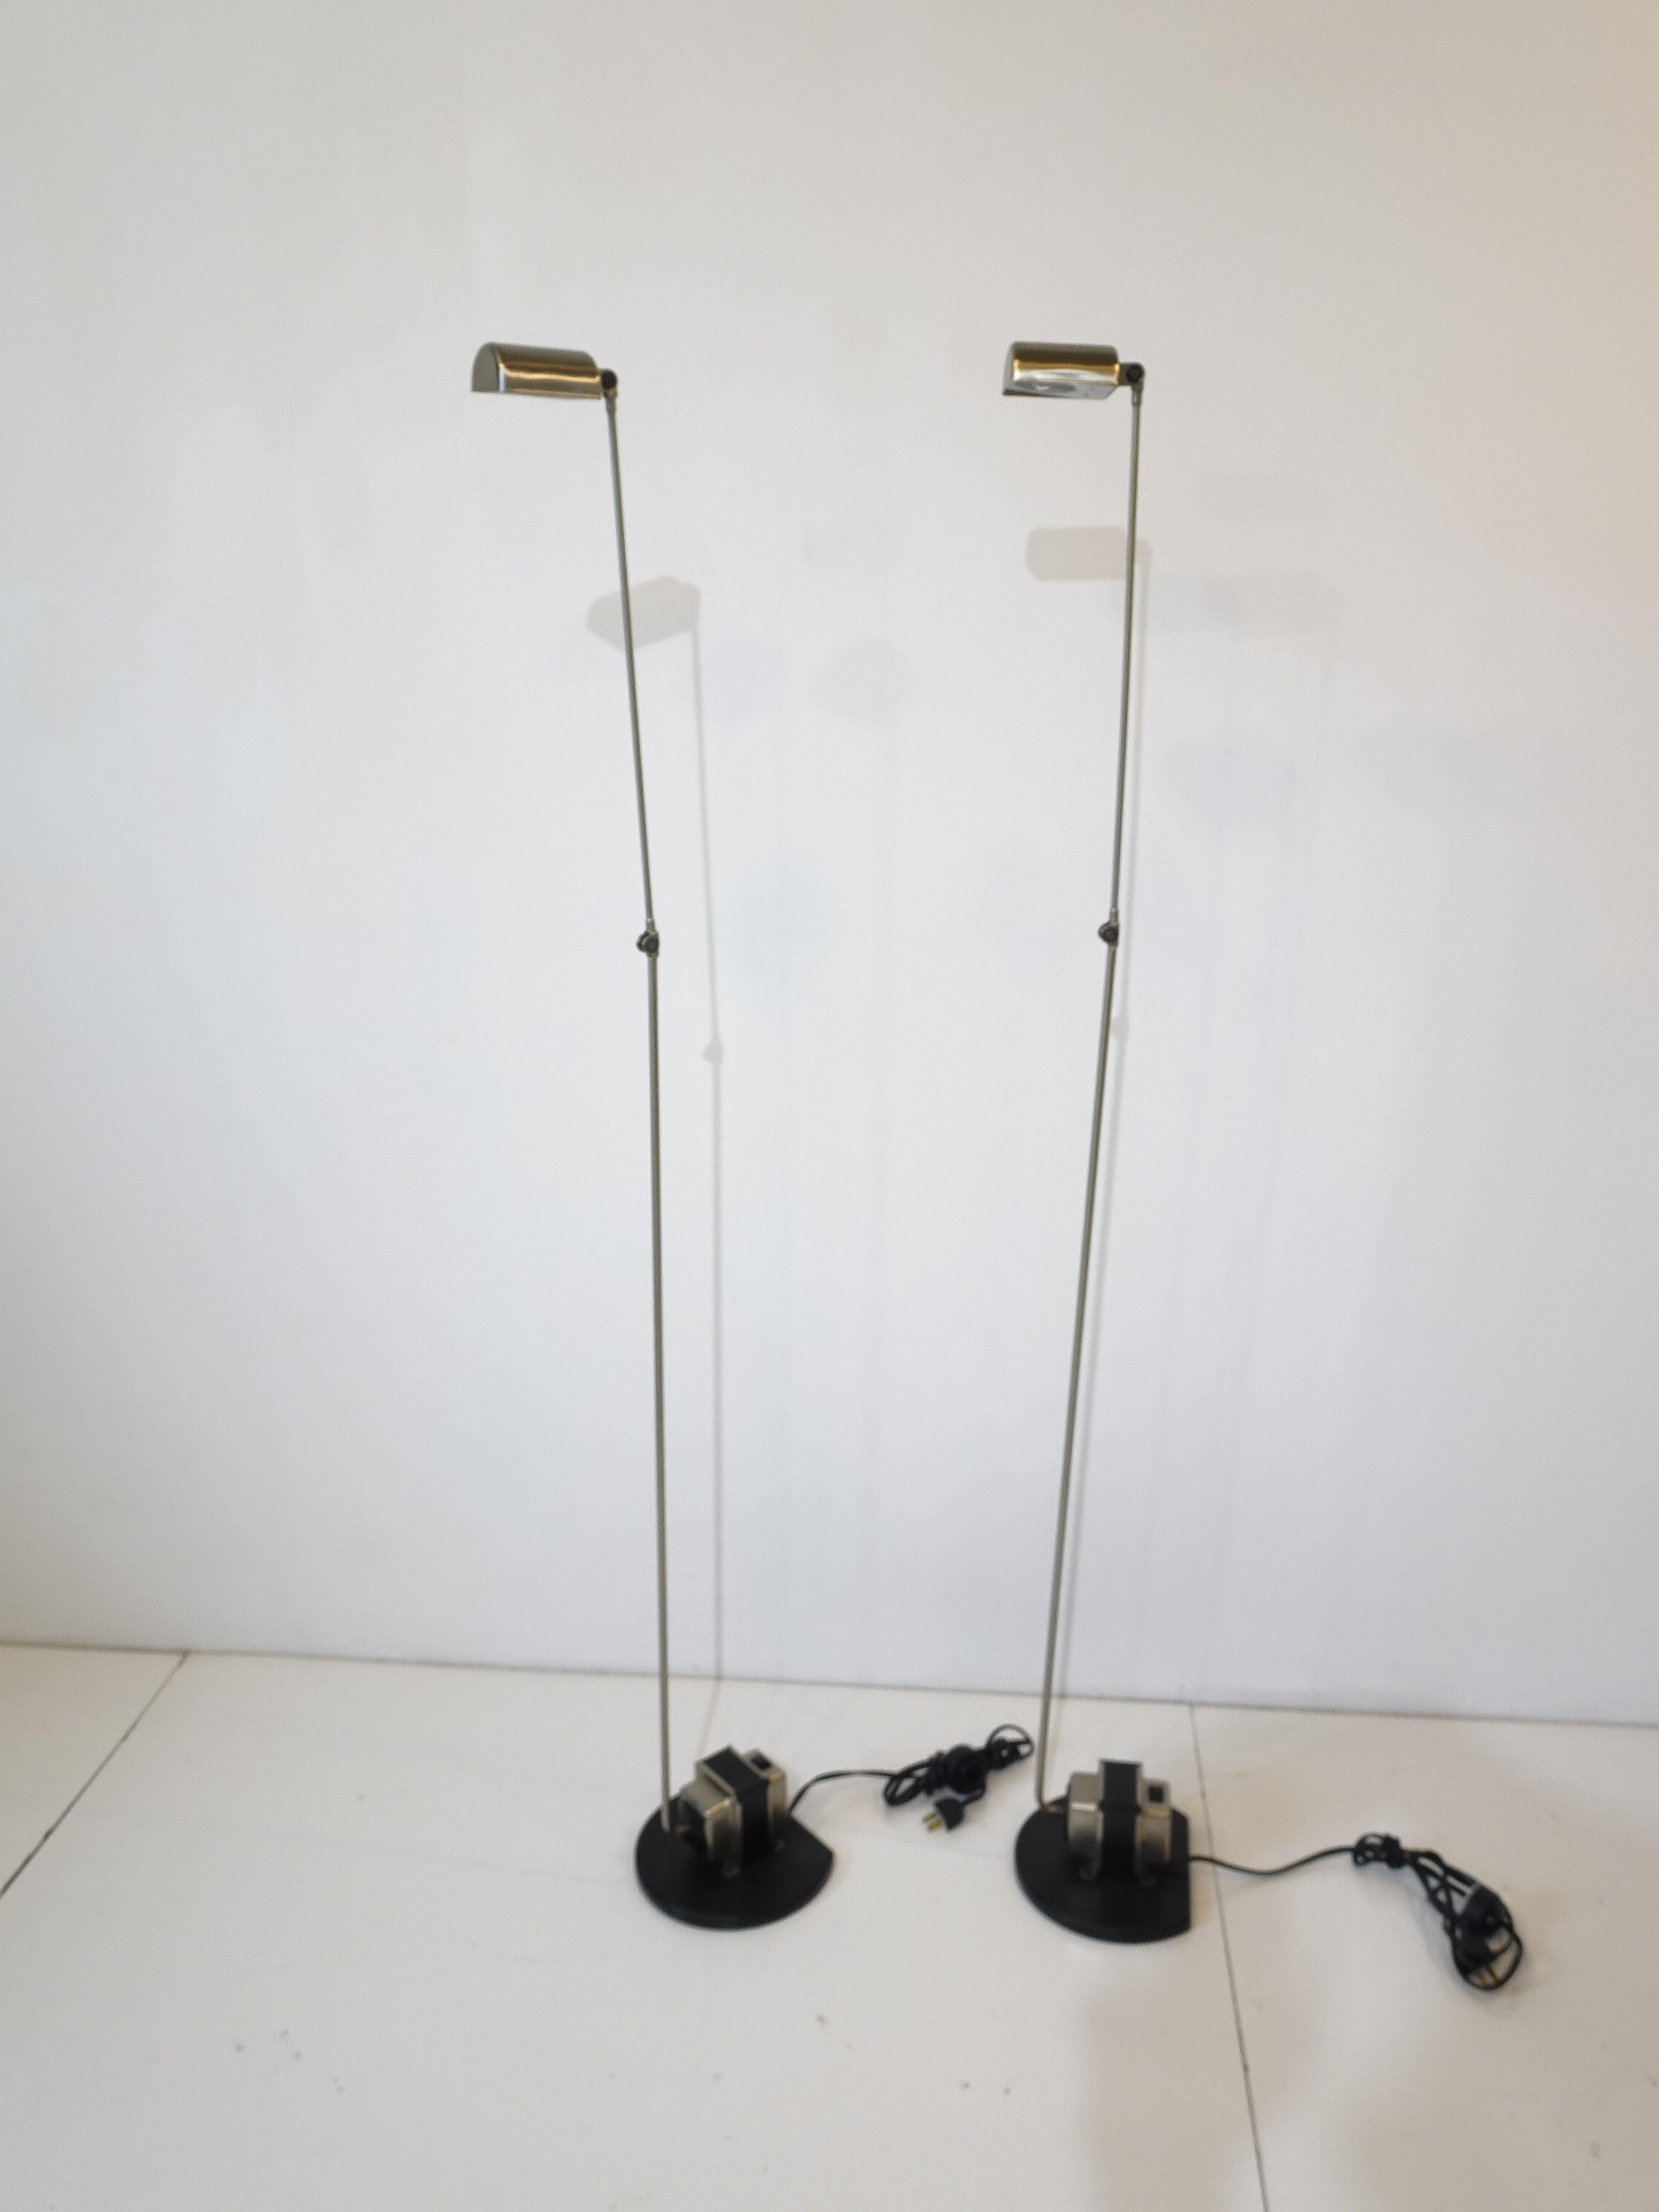 A pair of brushed nickel toned Italian Daphine Terra floor lamps with exposed transformer and black cast iron bases having articulating 360 degree arms . The stem of the light in the center bends and there's a ball in the base so the stem can rotate